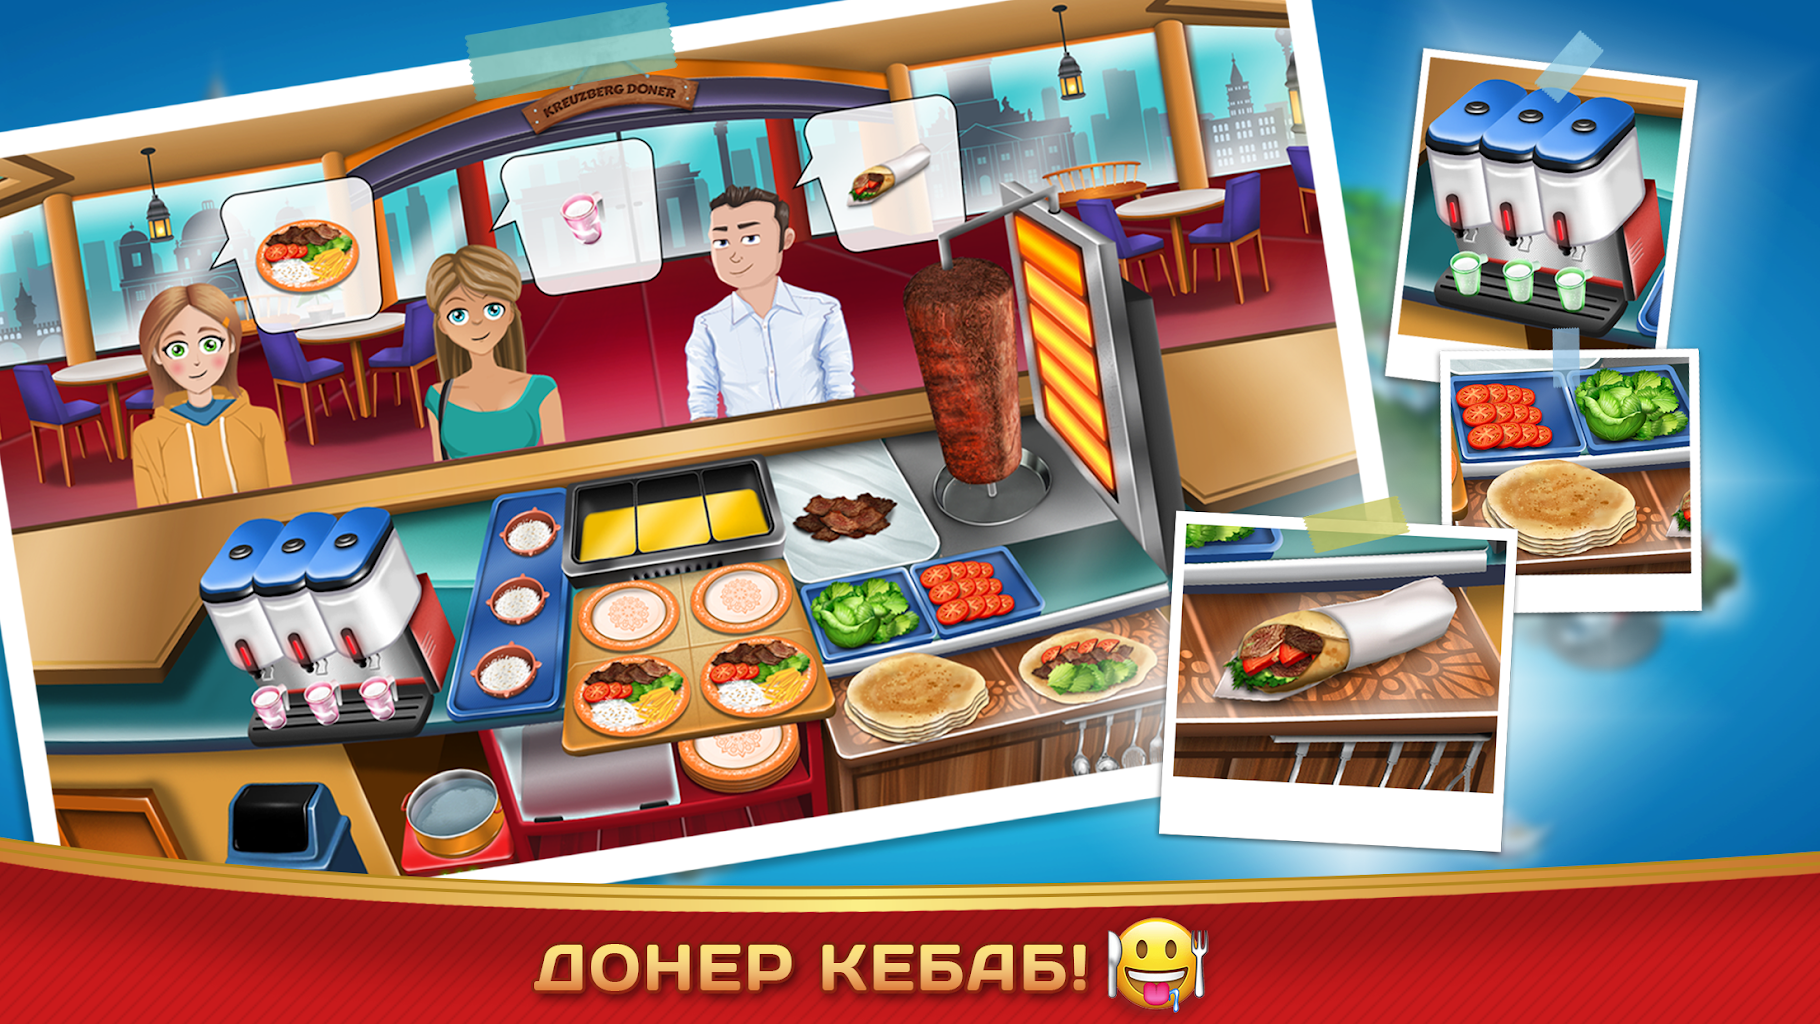 Fast food restaurant cooking game download full version